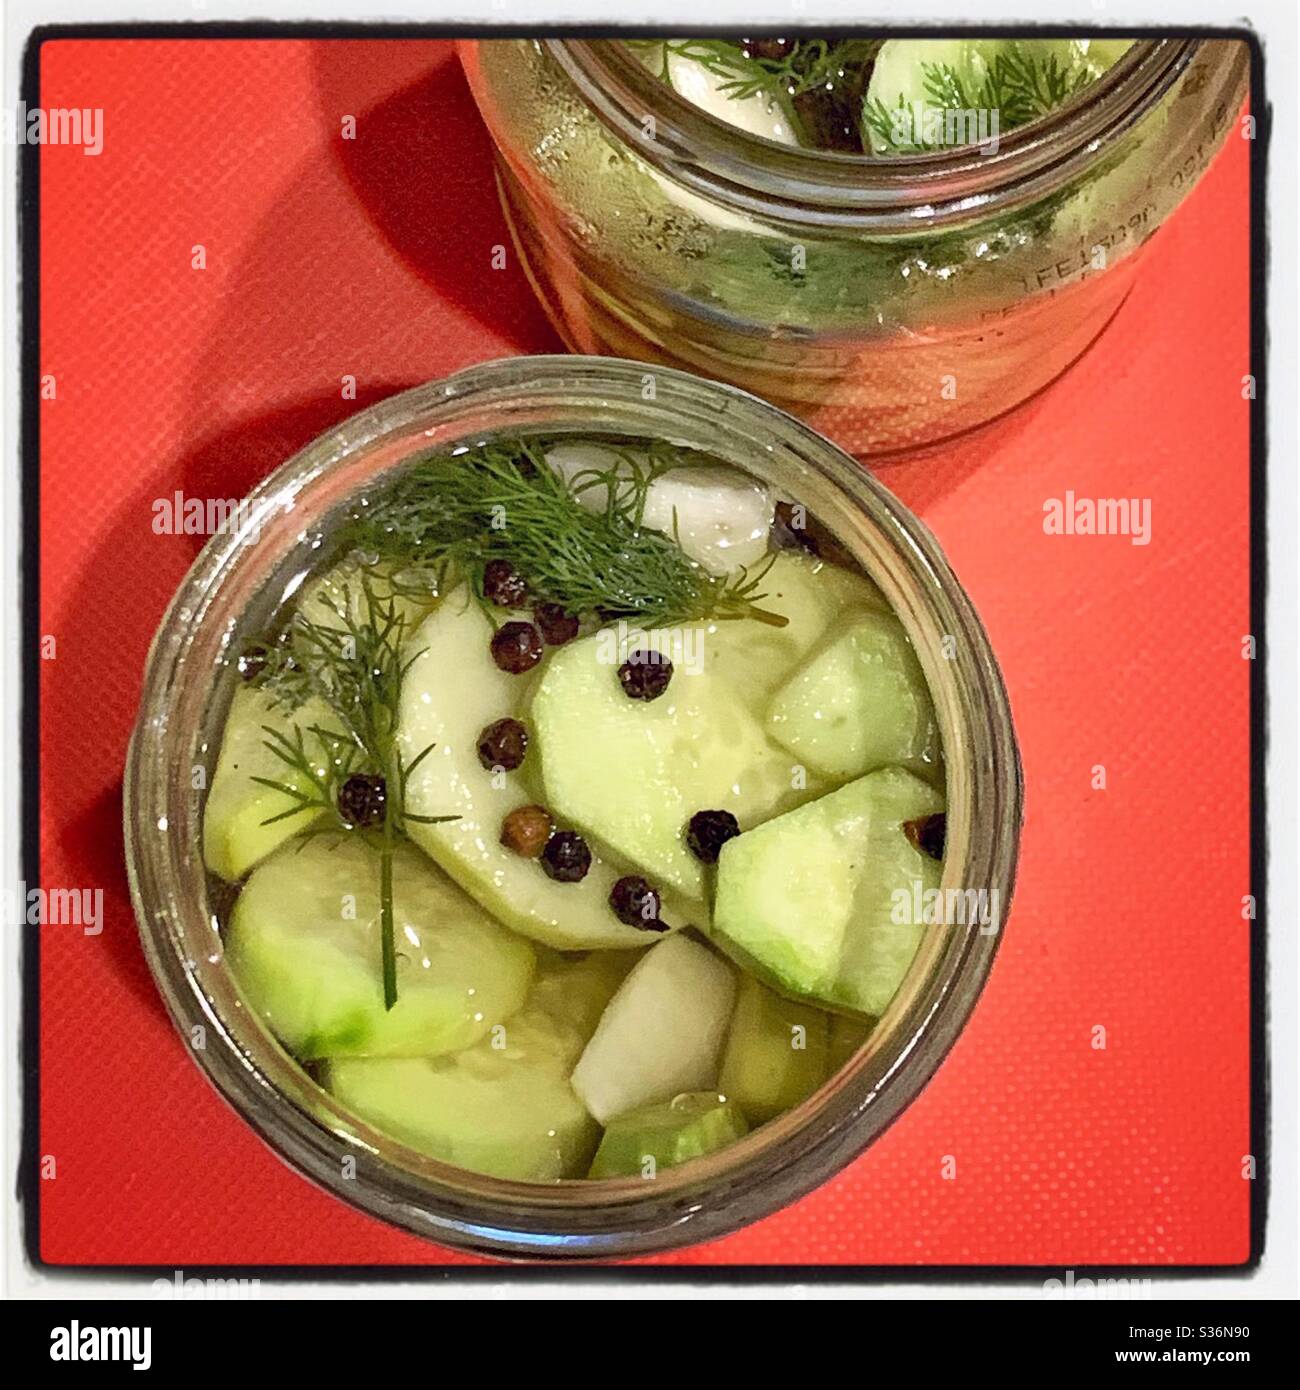 Homemade dill pickles with homegrown cucumbers and dill in jars. Stock Photo